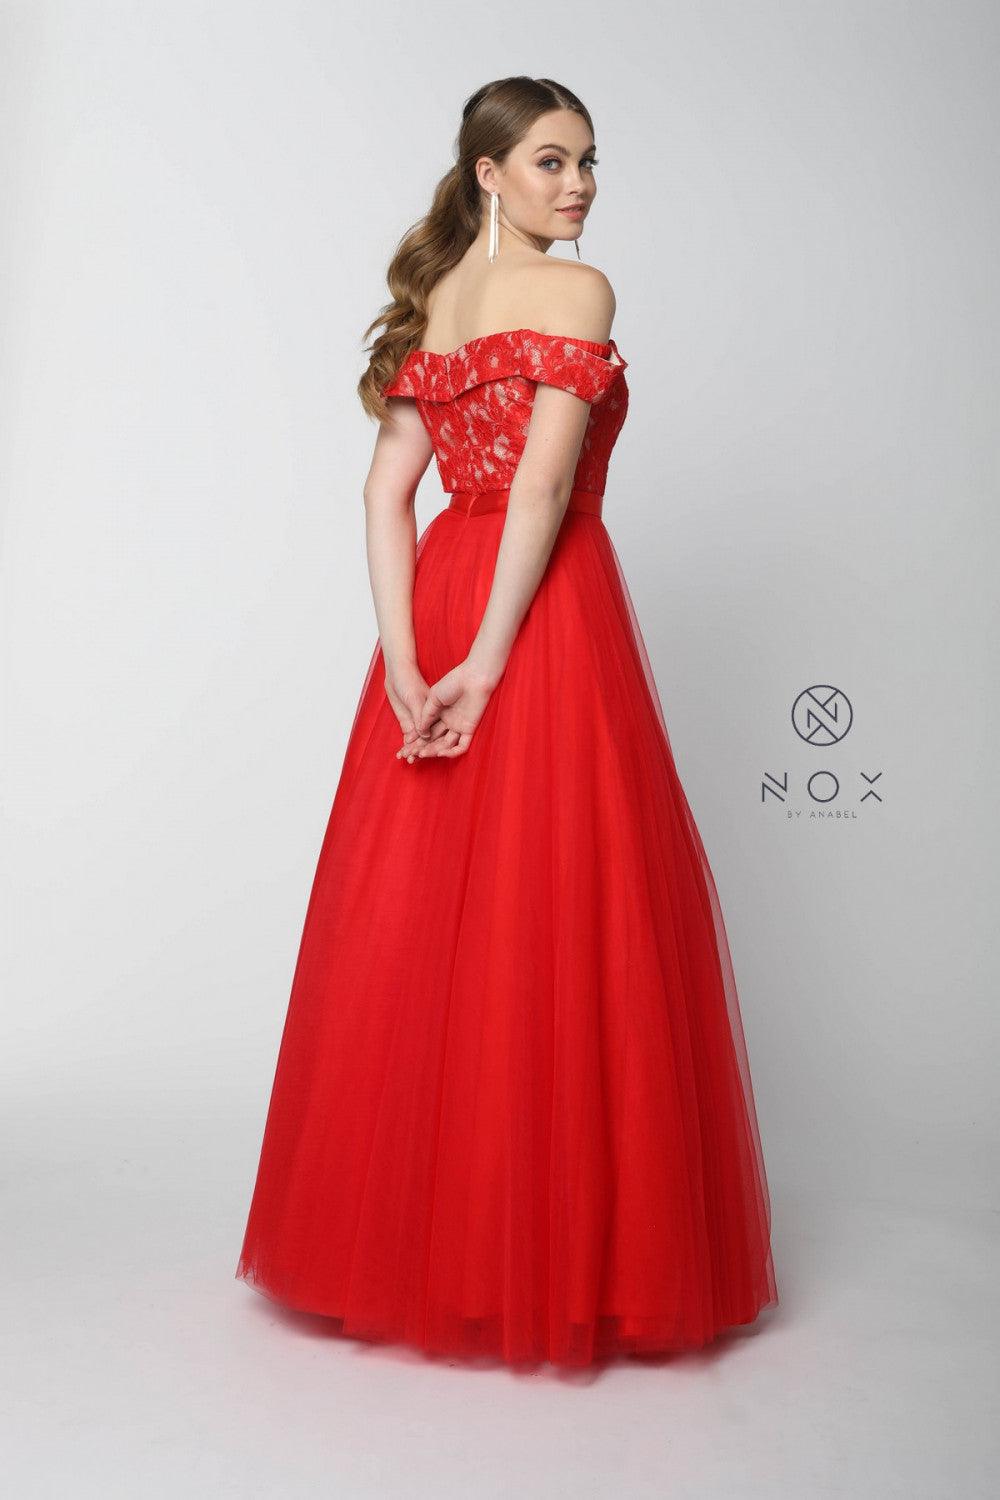 Long Formal Prom Dress Evening Gown - The Dress Outlet Nox Anabel